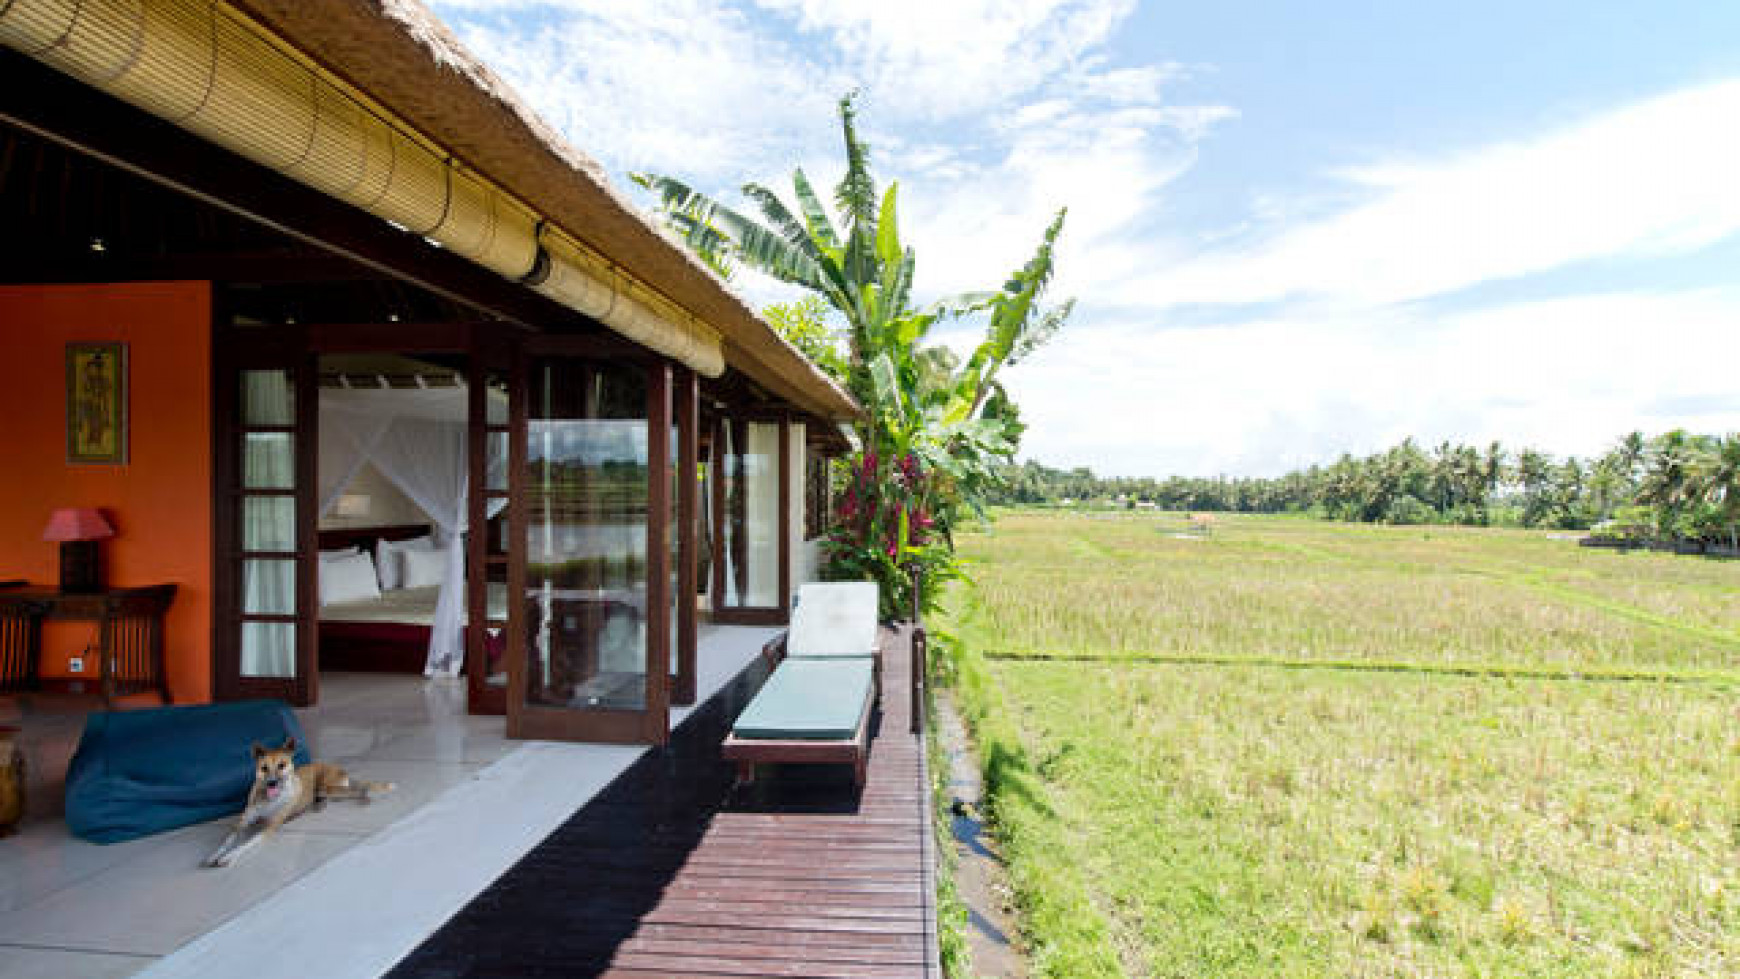 Amazing Villa Complex (5 Villas) on 1000 sq m of Freehold Land with Stunning Views 5 Minutes from the Center of Ubud